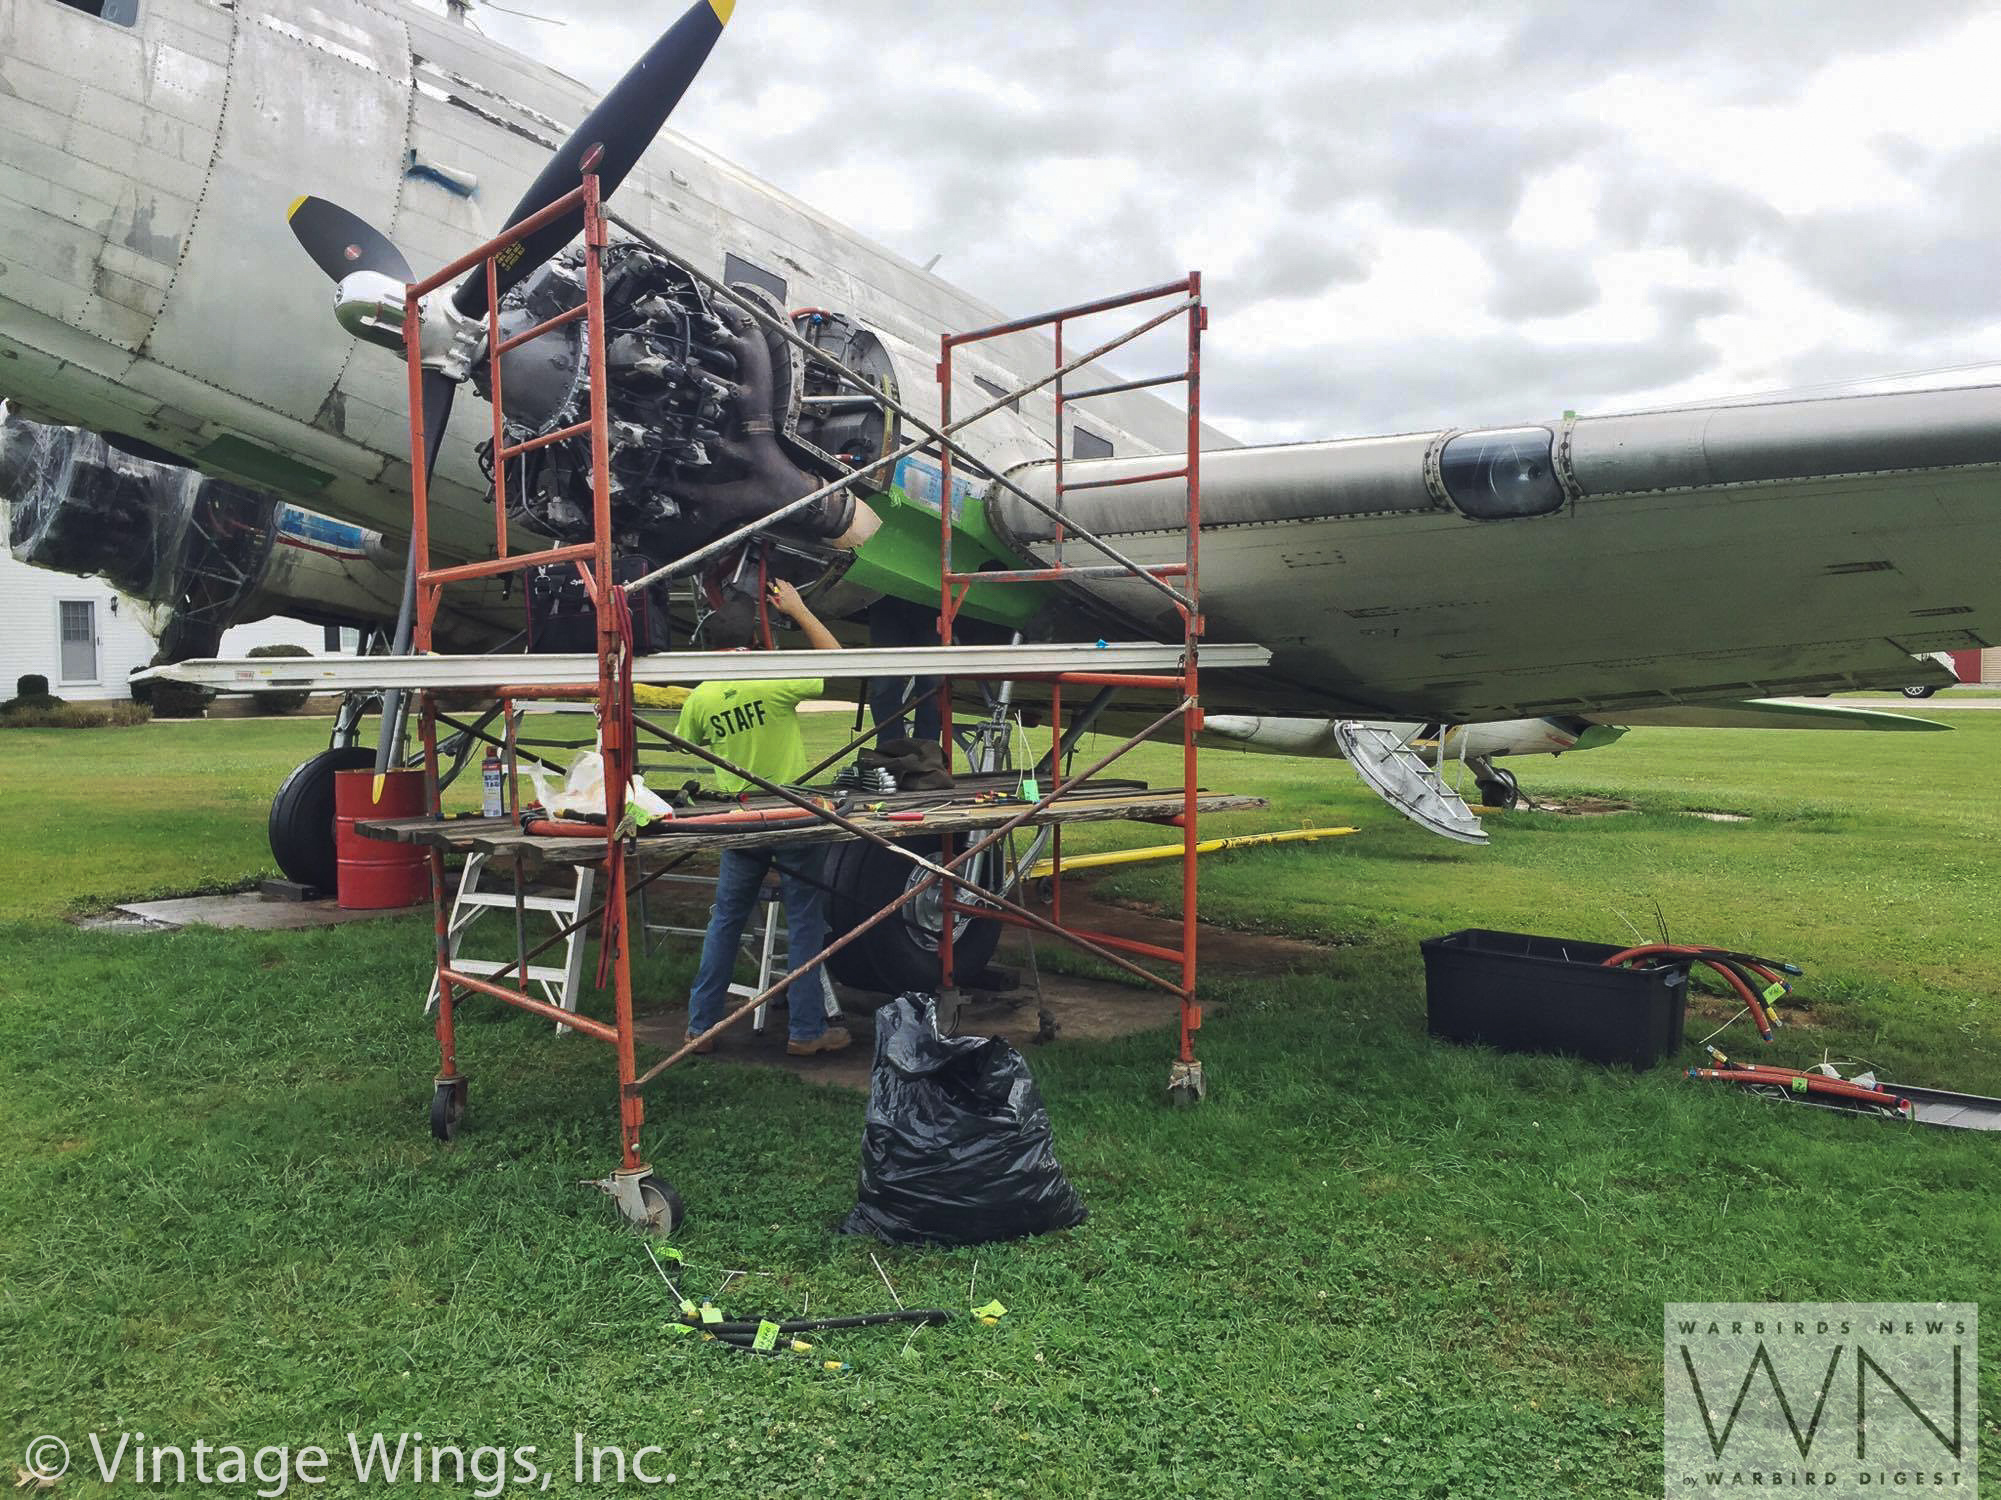 Scaffolding surrounds Beach City Baby's port engine as the crew works on it. (photo via Vintage Wings, Inc.)